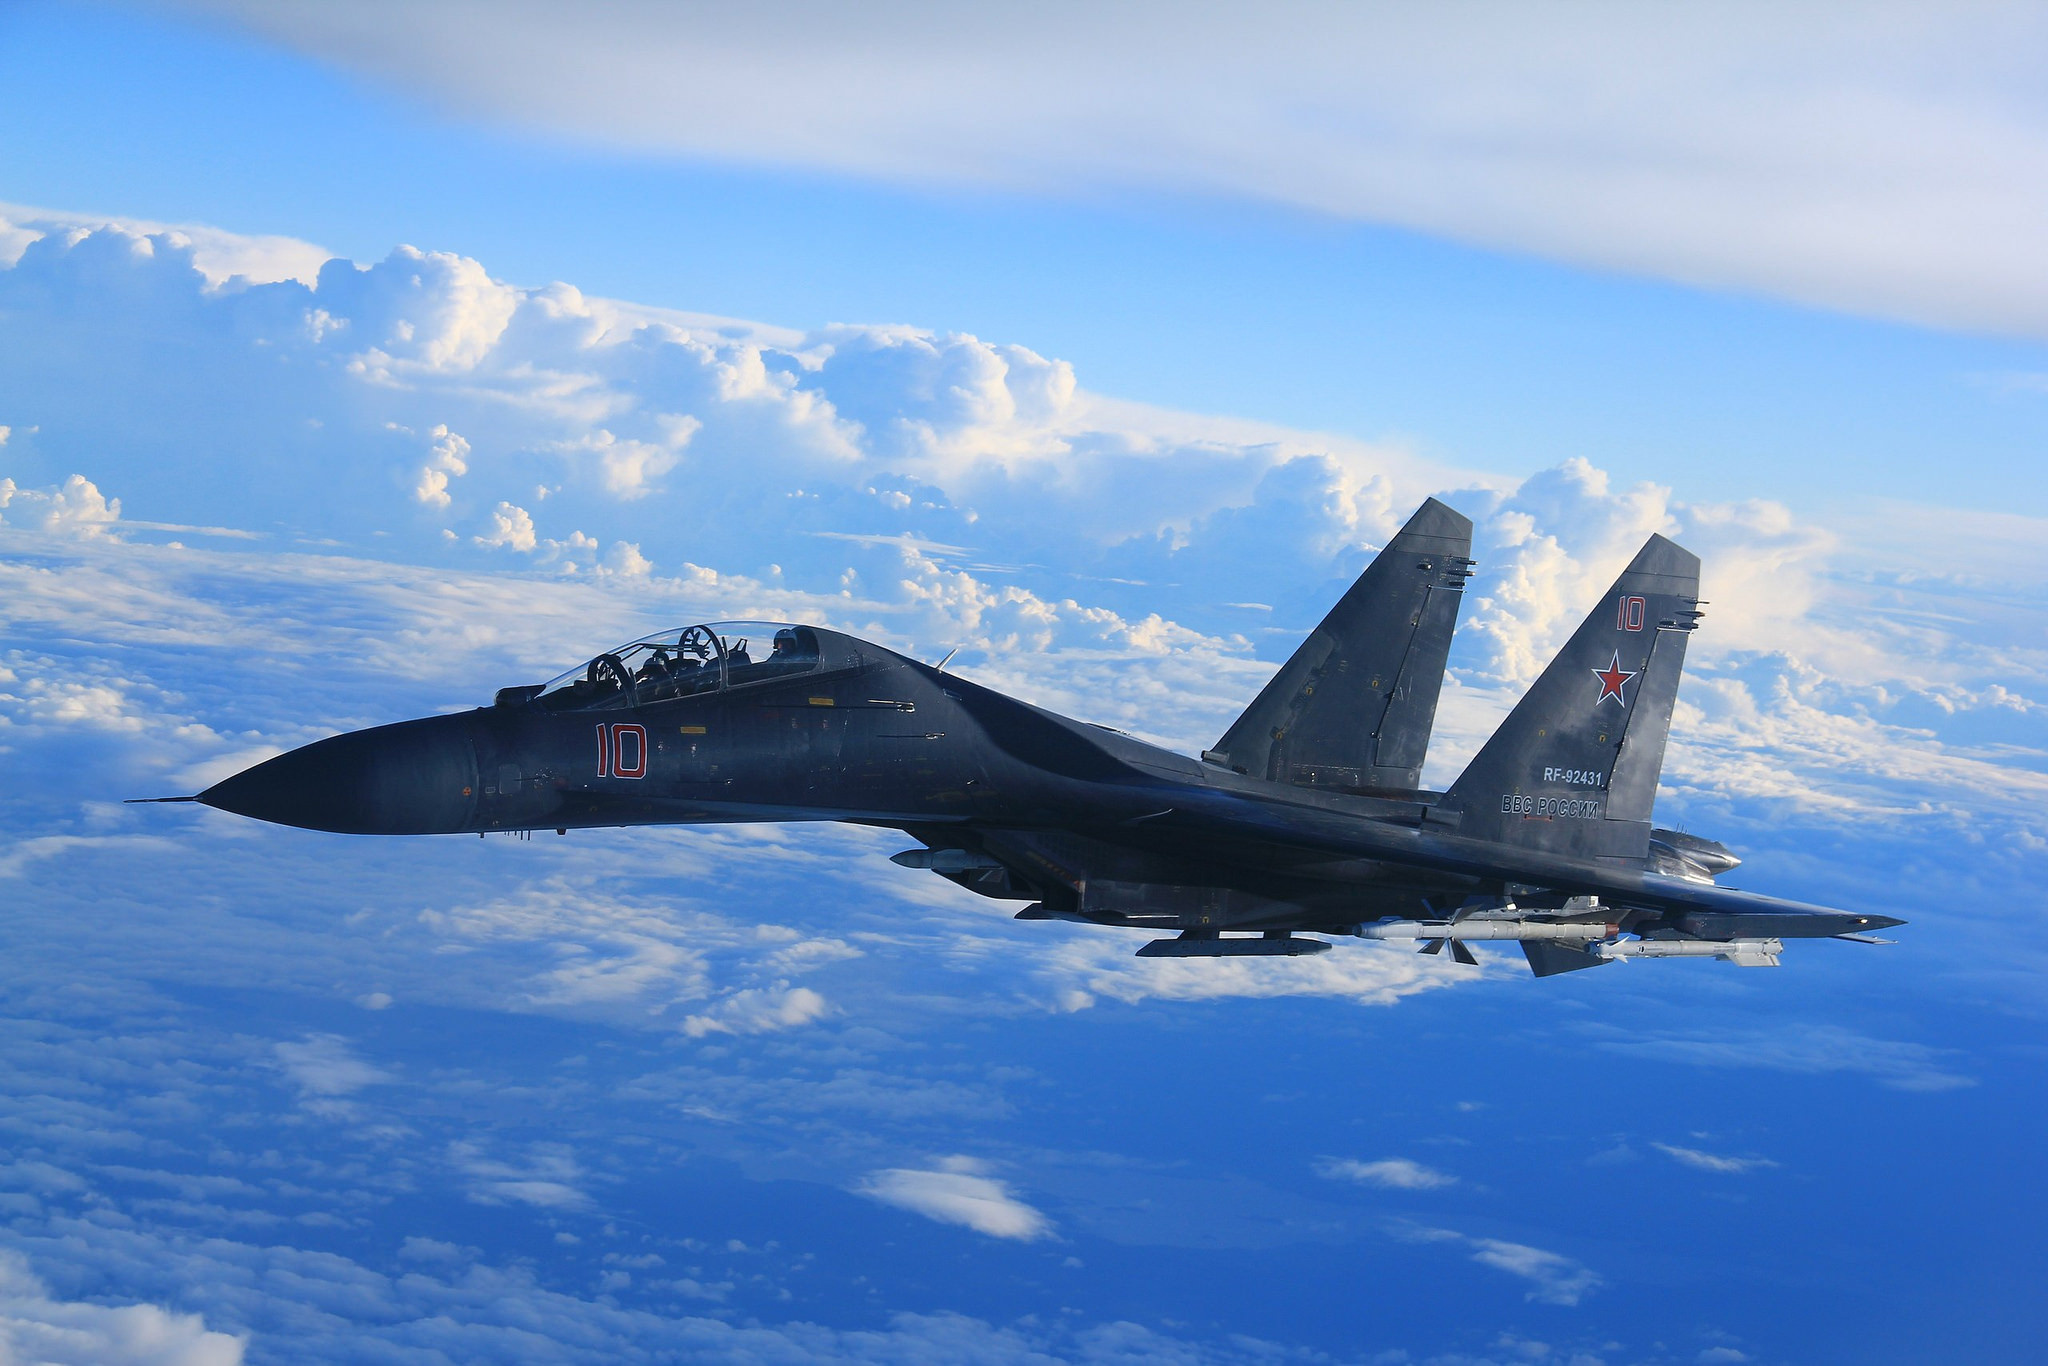 SU-35 is the latest model of SU-27 with more advance, powerful engine & radar